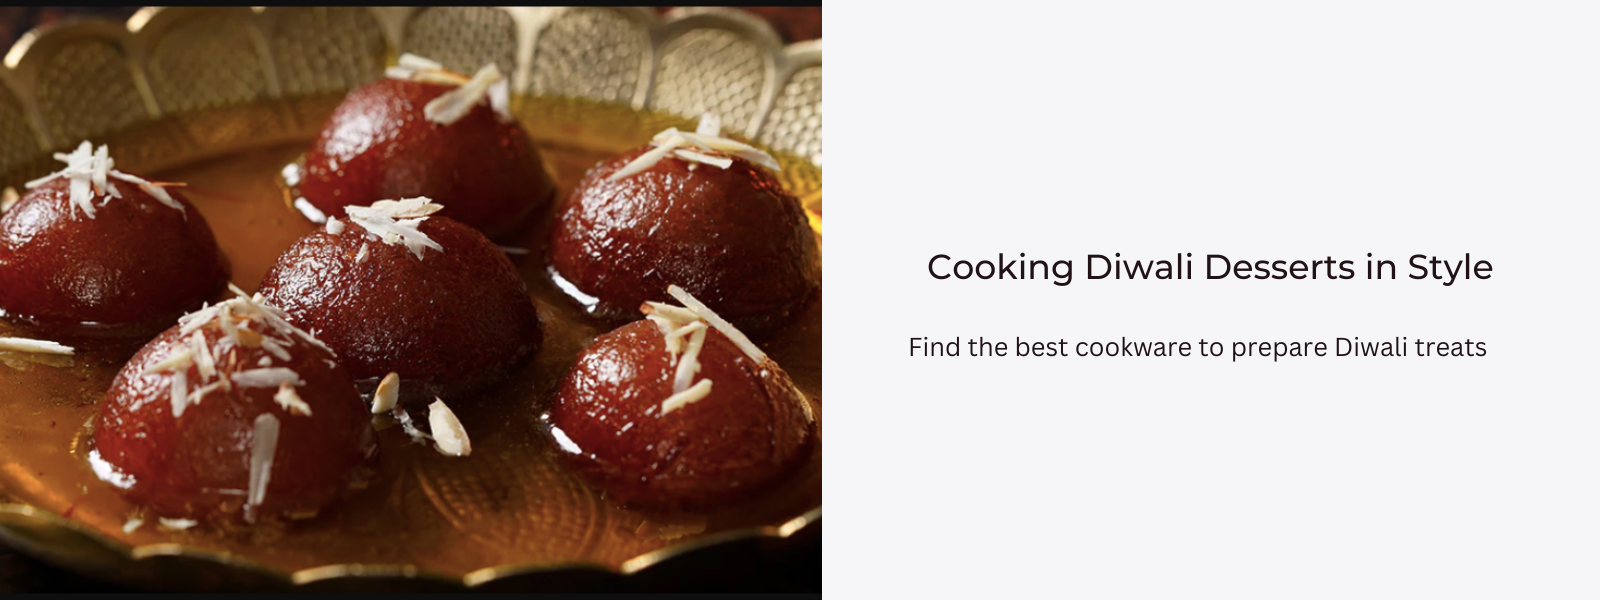 Cooking Sweets in Style: Diwali Dessert Cookware